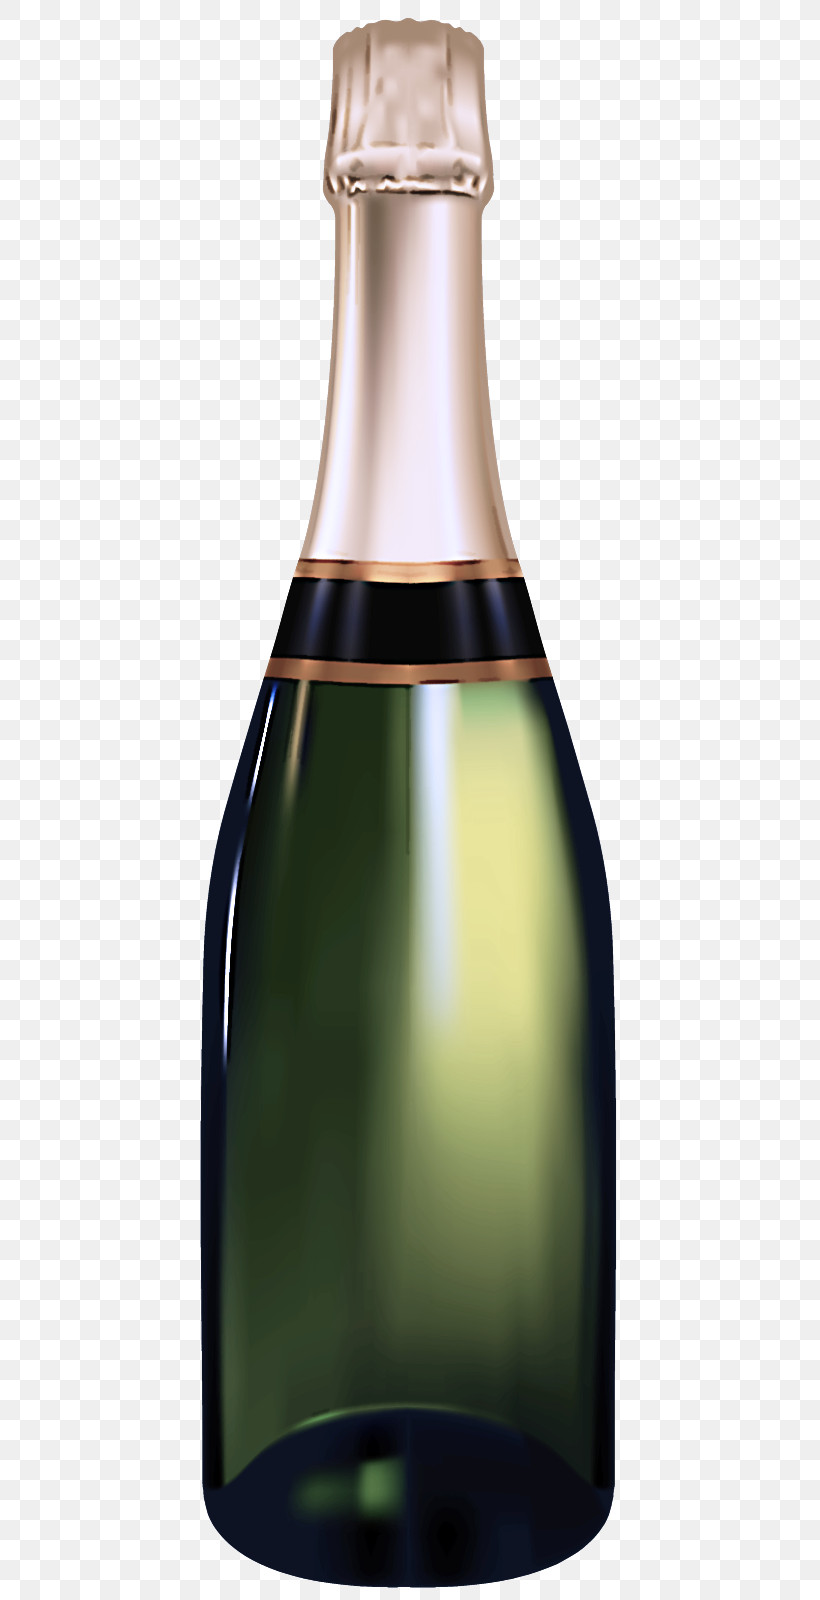 Champagne, PNG, 487x1600px, Champagne, Alcohol, Alcoholic Beverage, Bottle, Dessert Wine Download Free